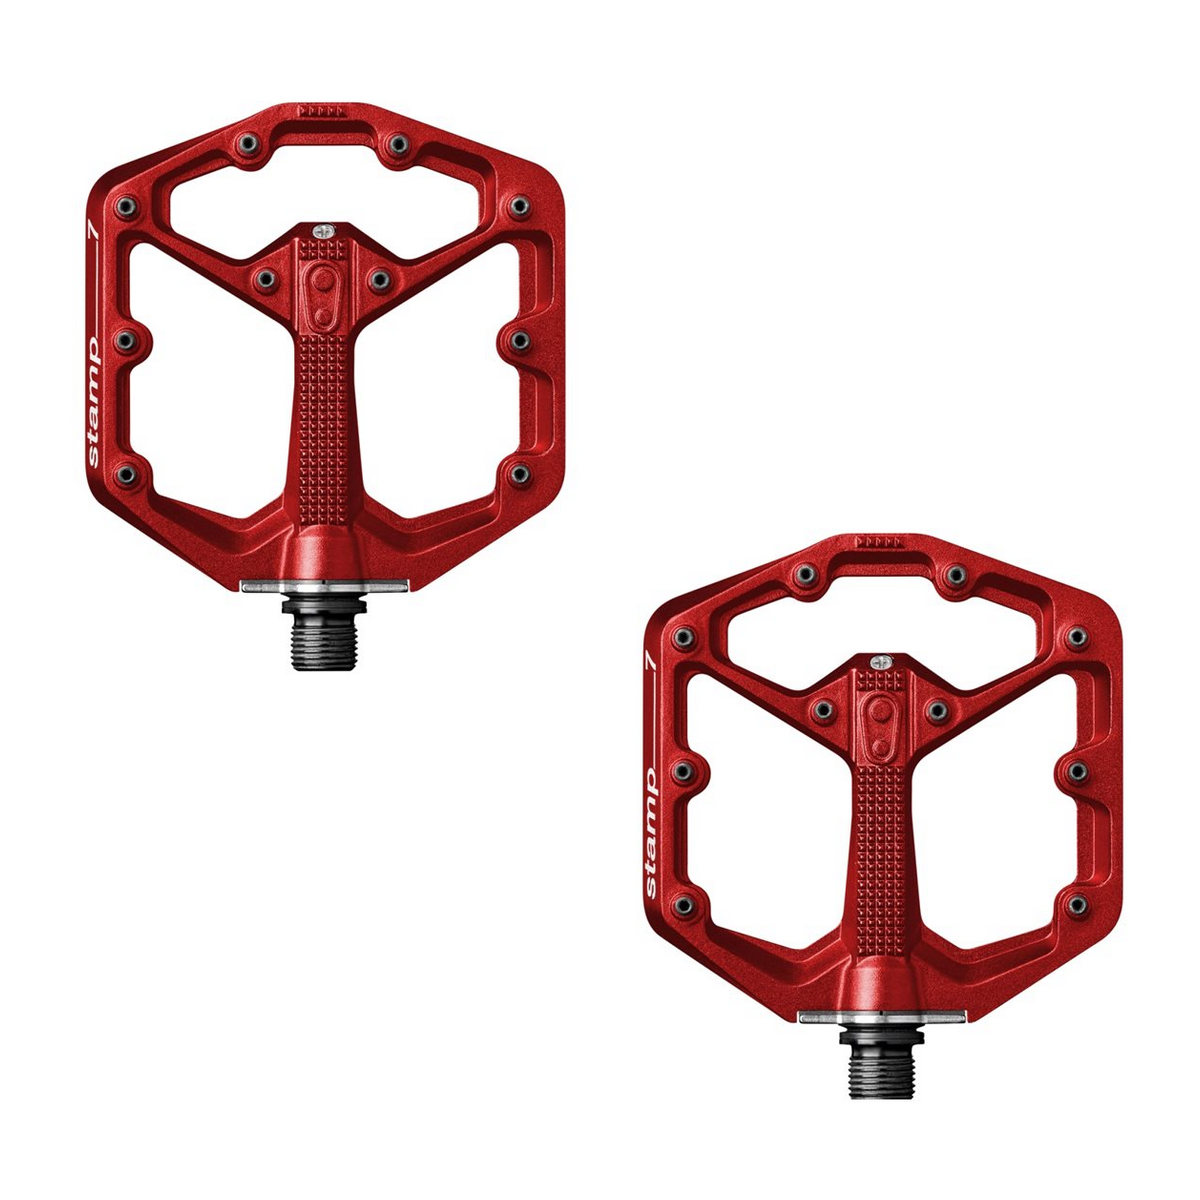 Pair of pedals Stamp 7 Large red